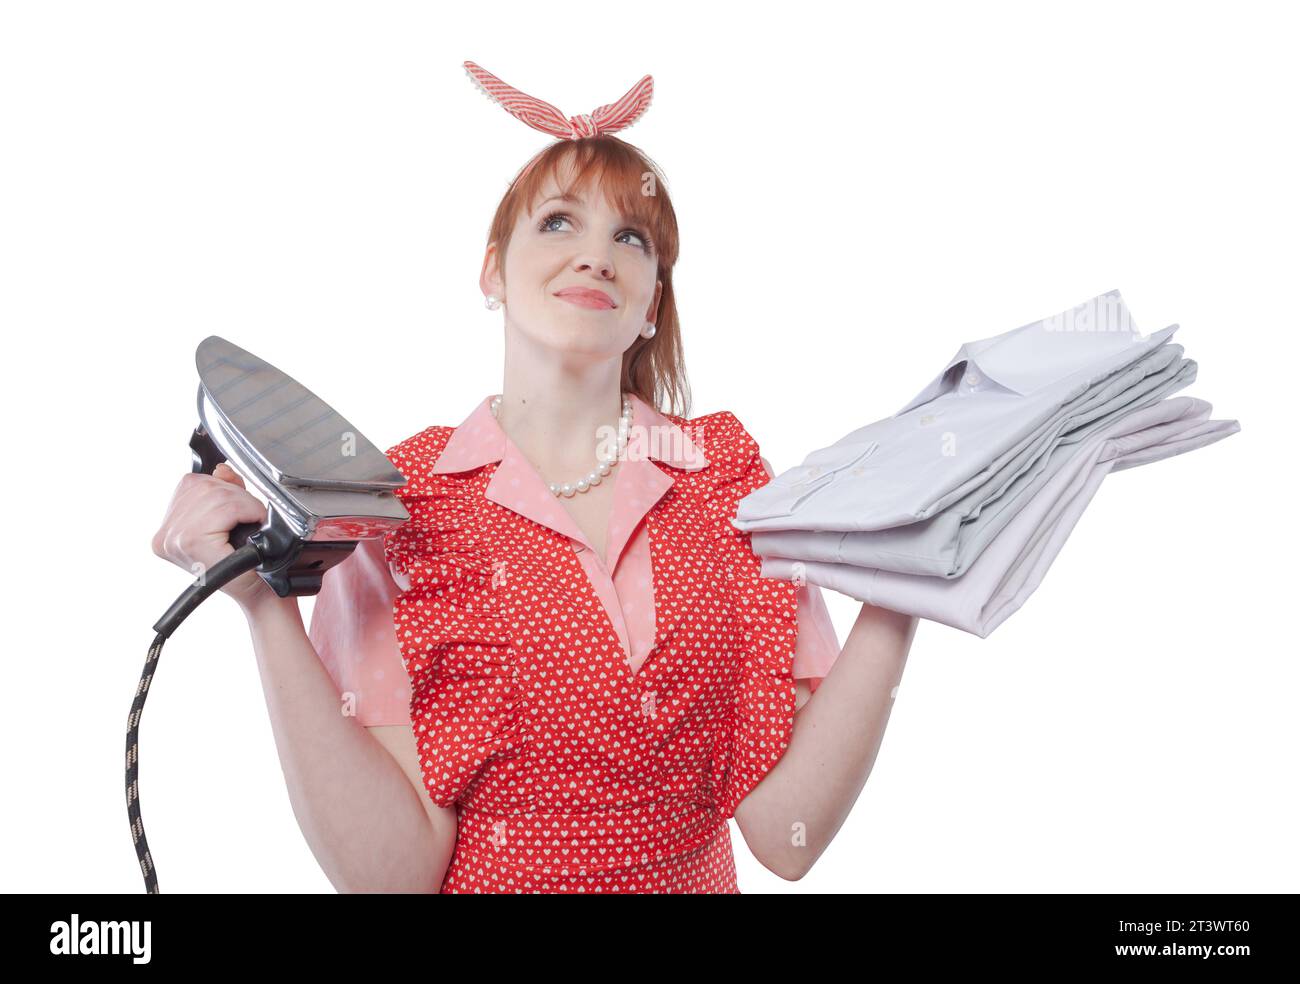 Vintage style efficient housewife holding an iron and a pile of clean ironed shirts Stock Photo